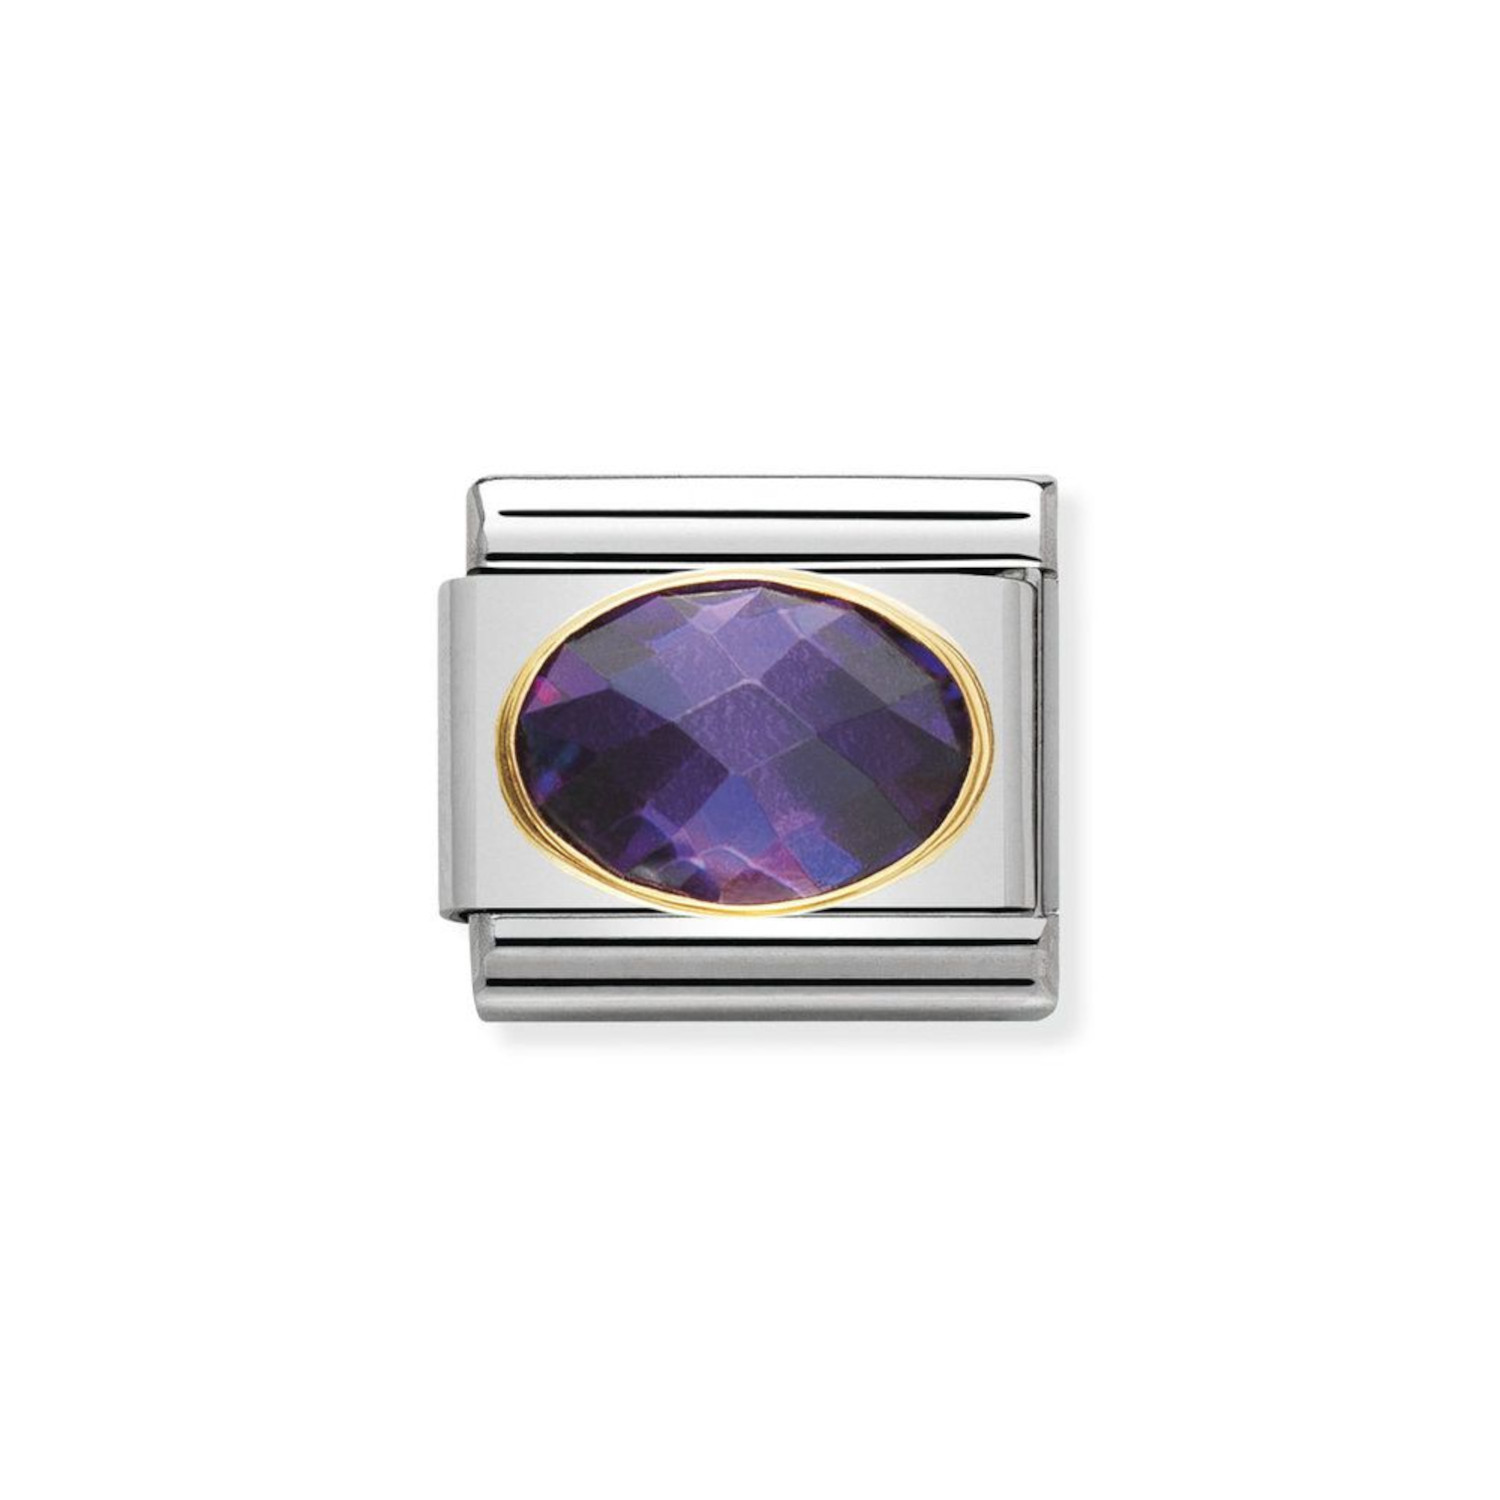 NOMINATION COMPOSABLE CLASSIC LINK IN 18K GOLD WITH VIOLET AND FACETED STONE 030601/001